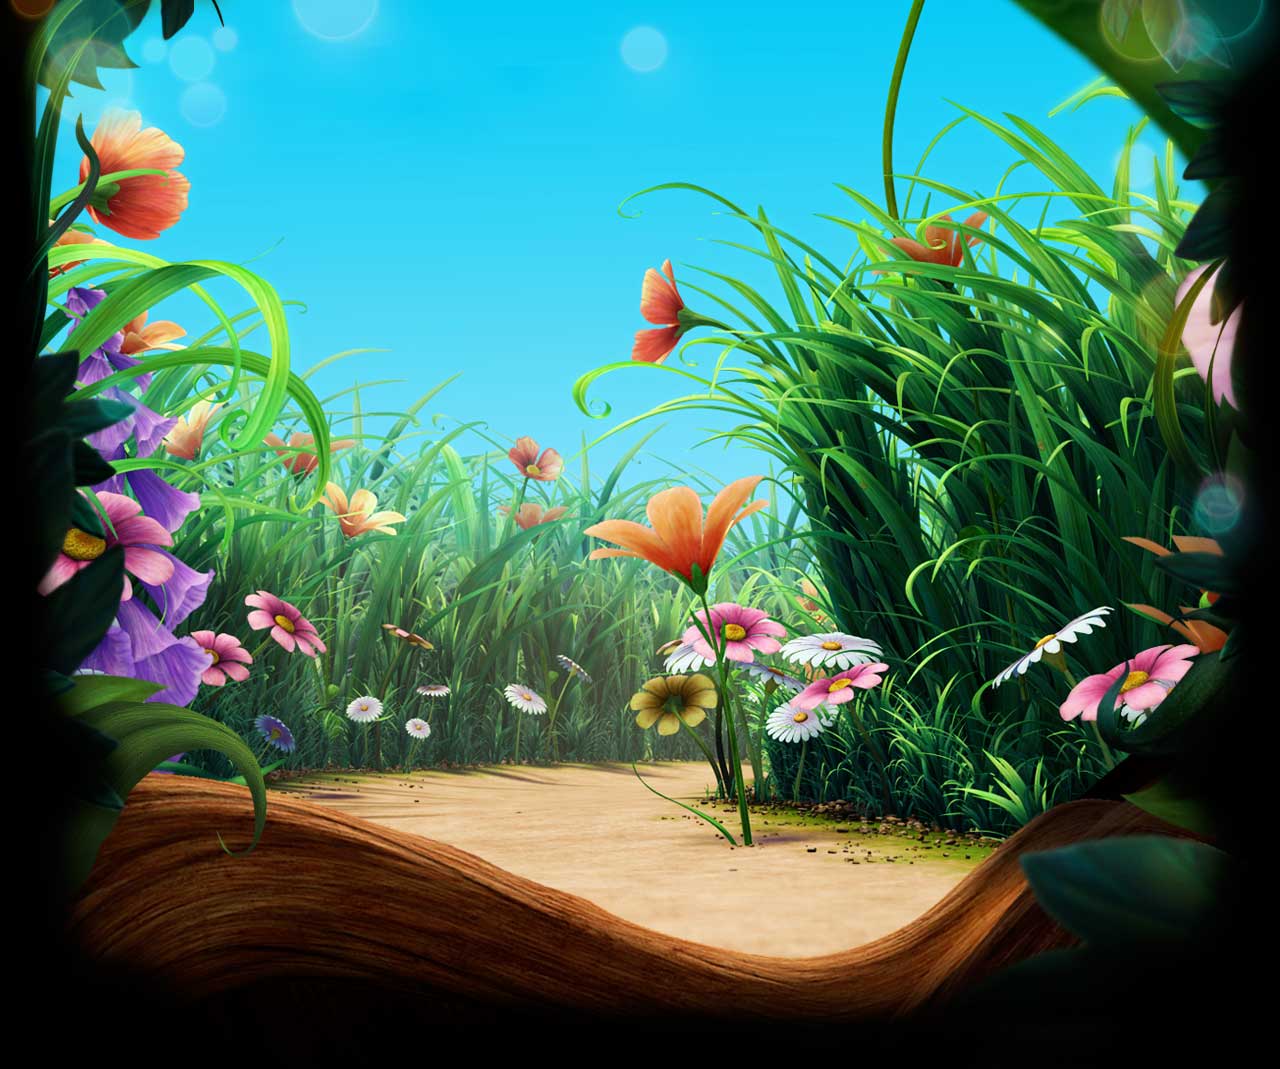 Image gallery for pixie hollow wallpapers